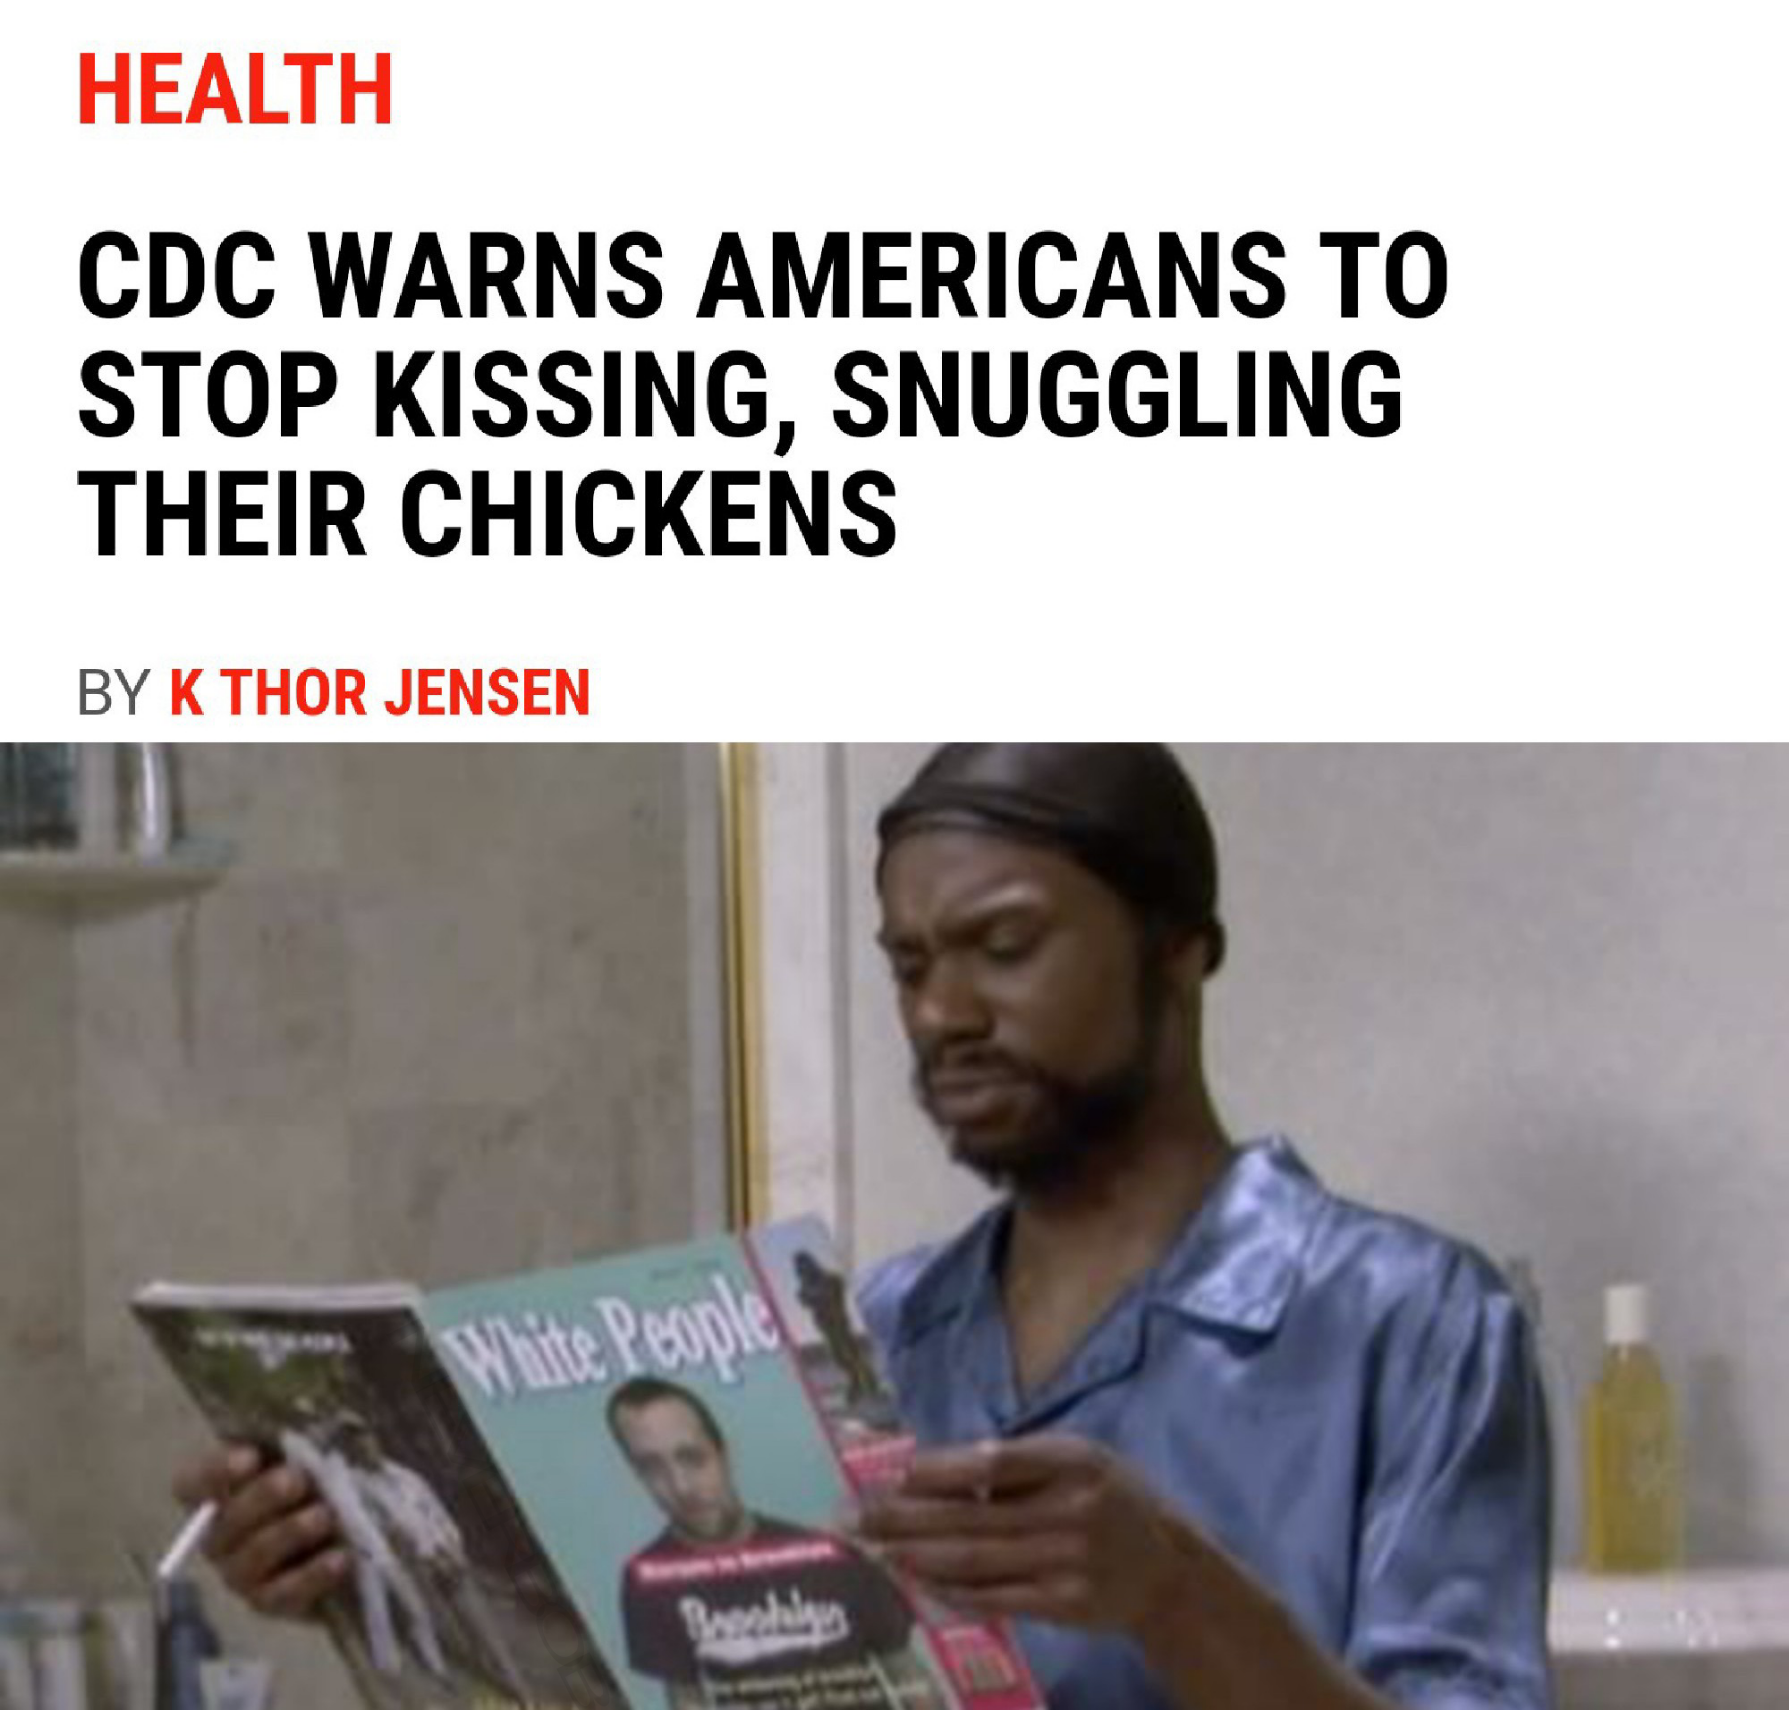 white people magazine meme - Health Cdc Warns Americans To Stop Kissing, Snuggling Their Chickens By K Thor Jensen White People